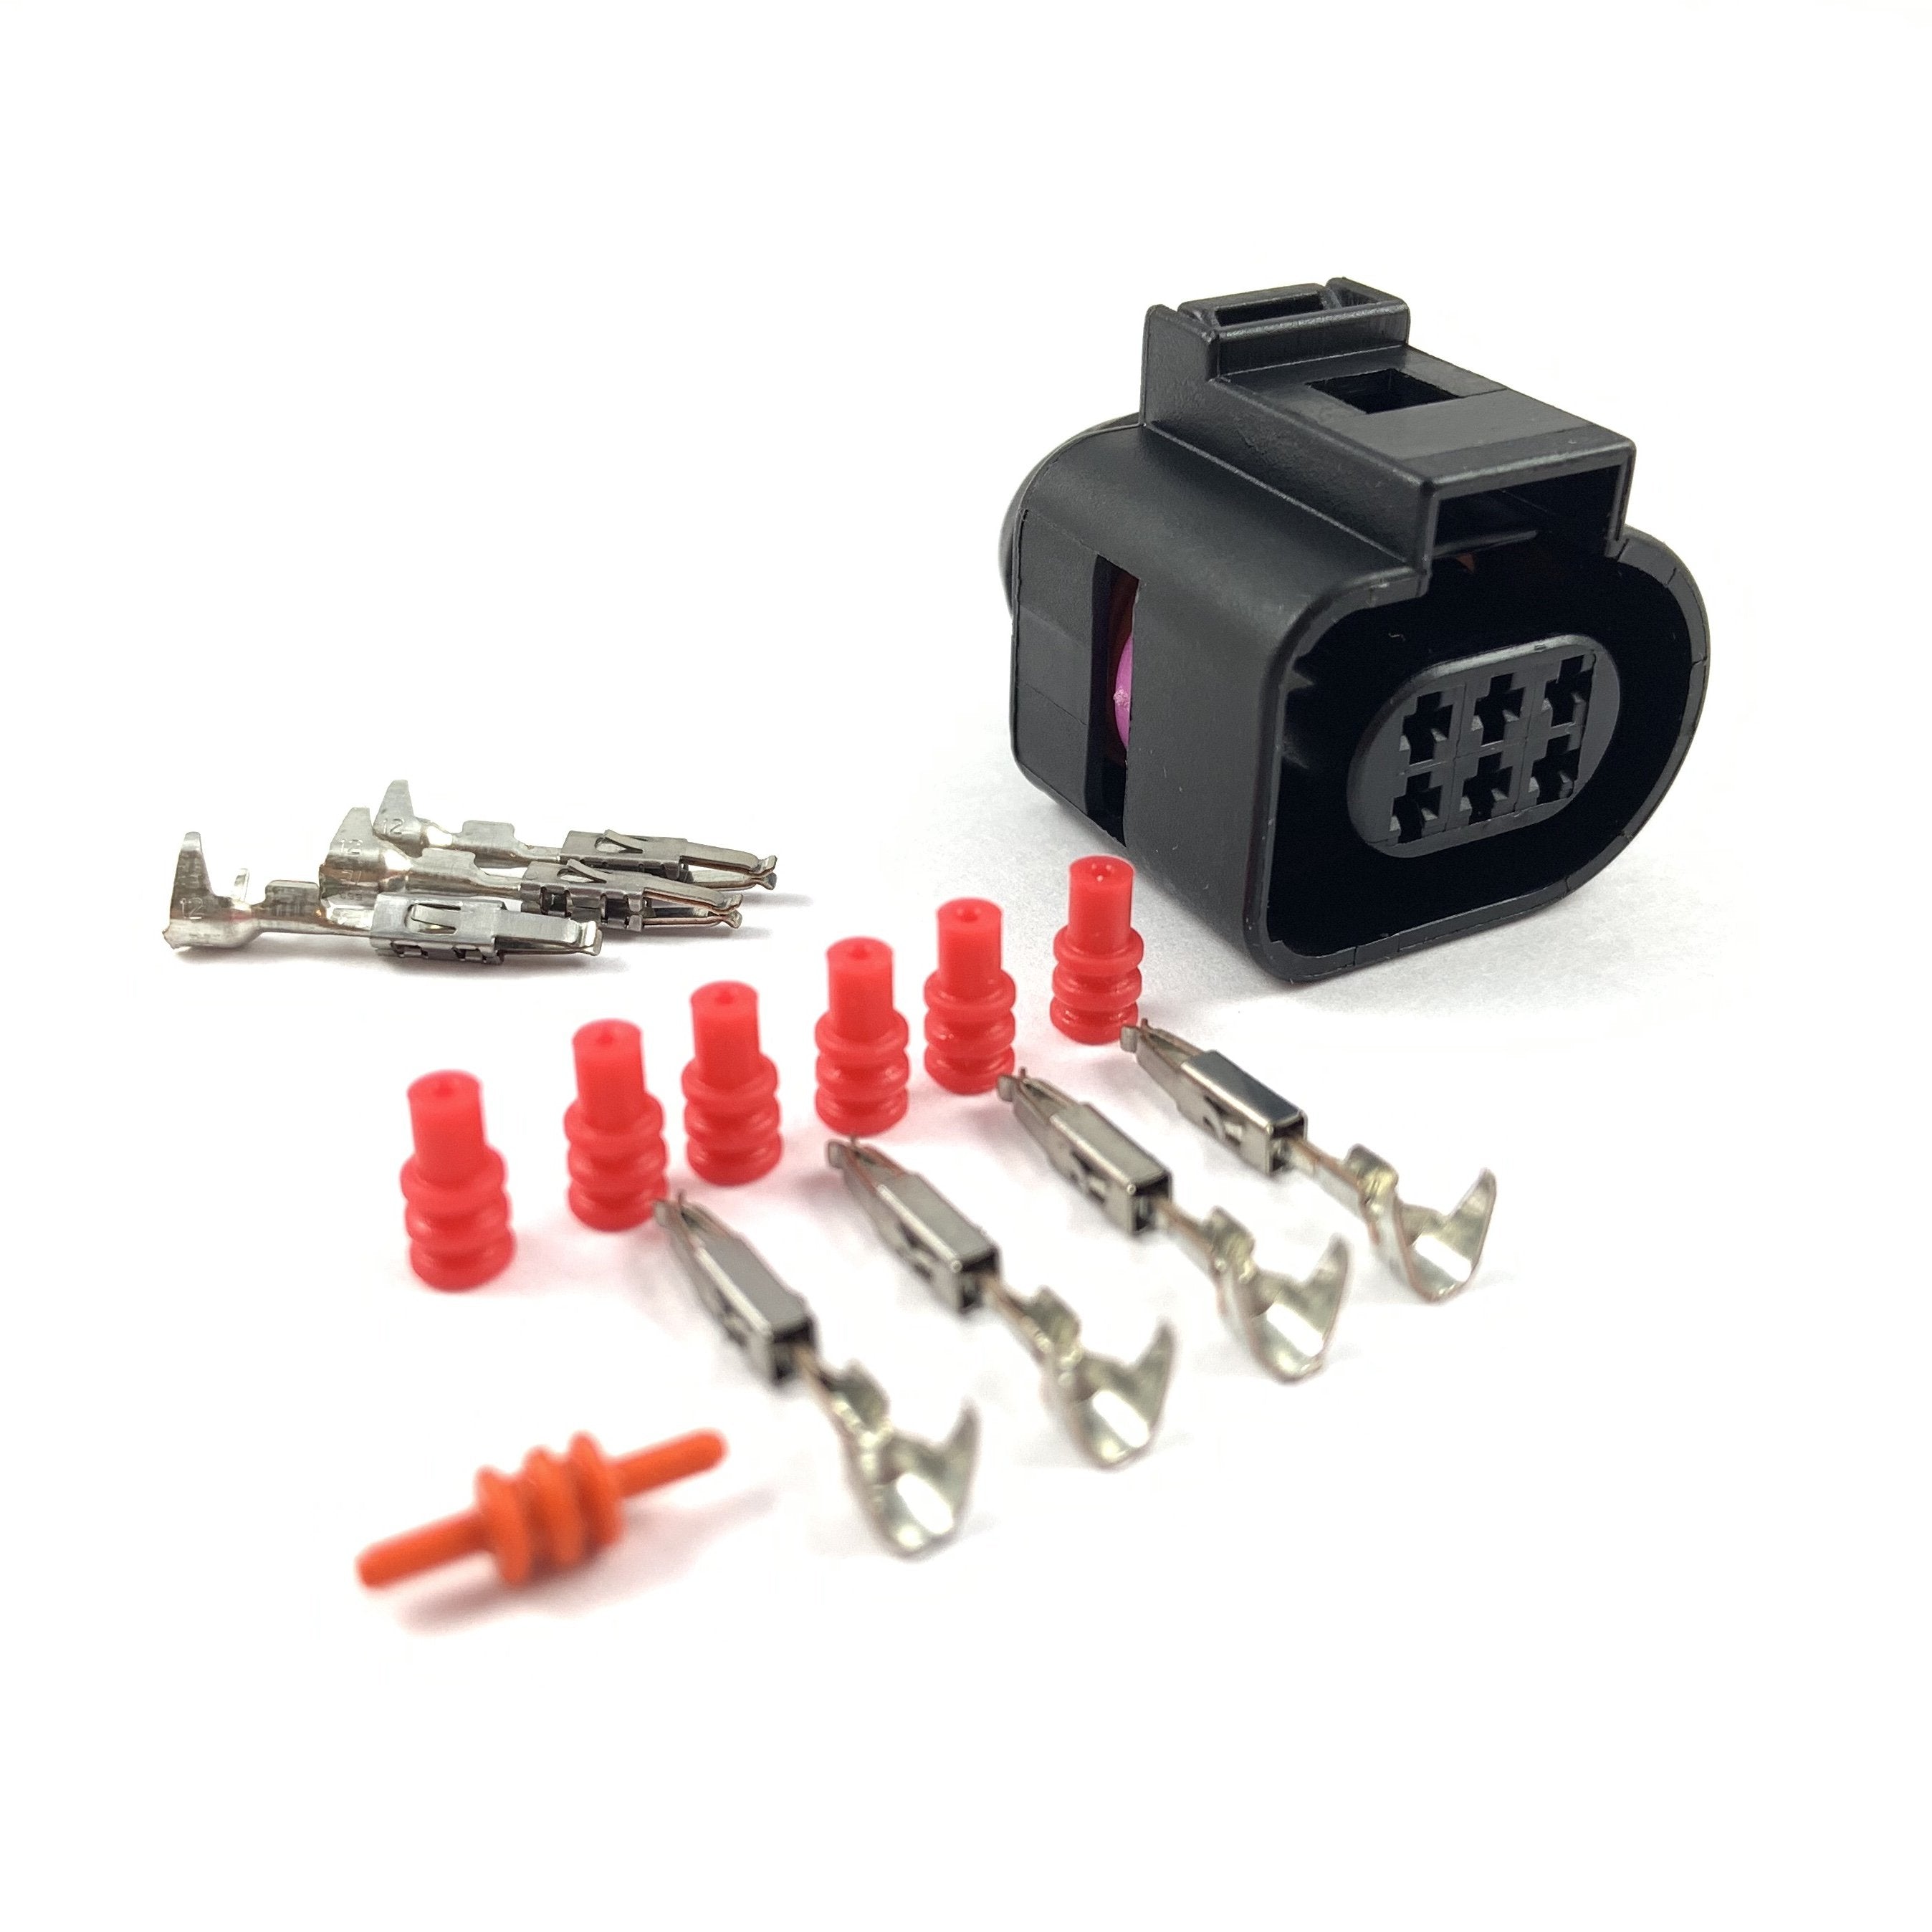 4 Way Lambdasonde Sensor Male And Female Connector Kits With Terminals And  Rubber Seals - Cables, Adapters & Sockets - AliExpress